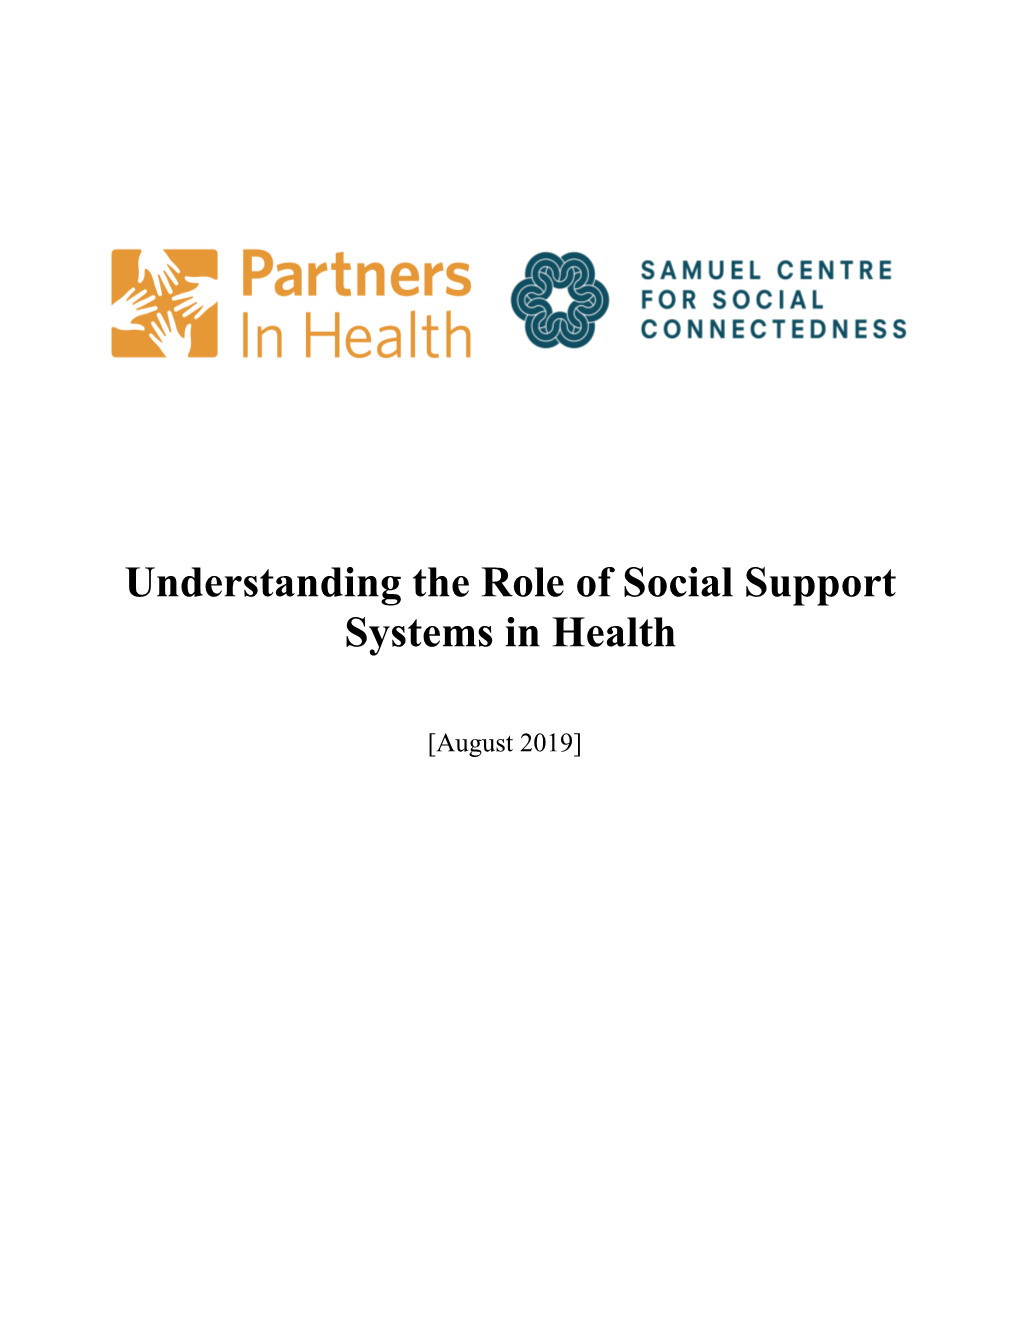 Understanding the Role of Social Support Systems in Health